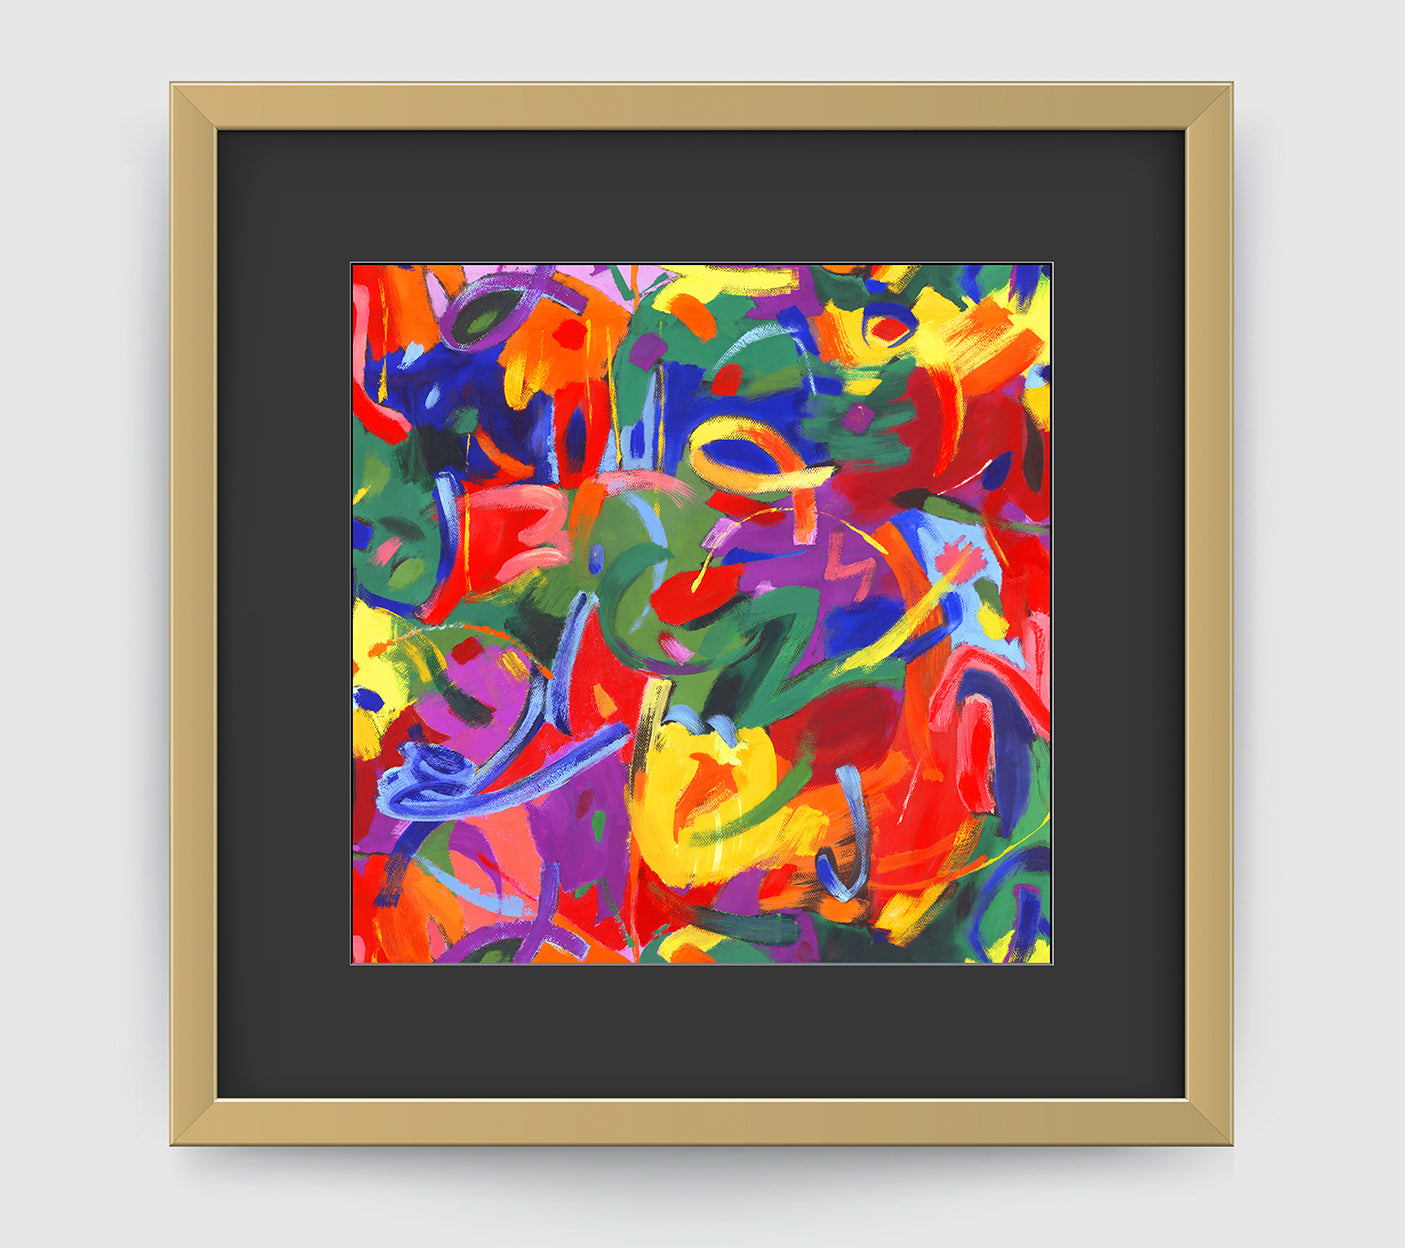 Brushstroke Art Print - Abstract Art Wall Decor Collection-Di Lewis